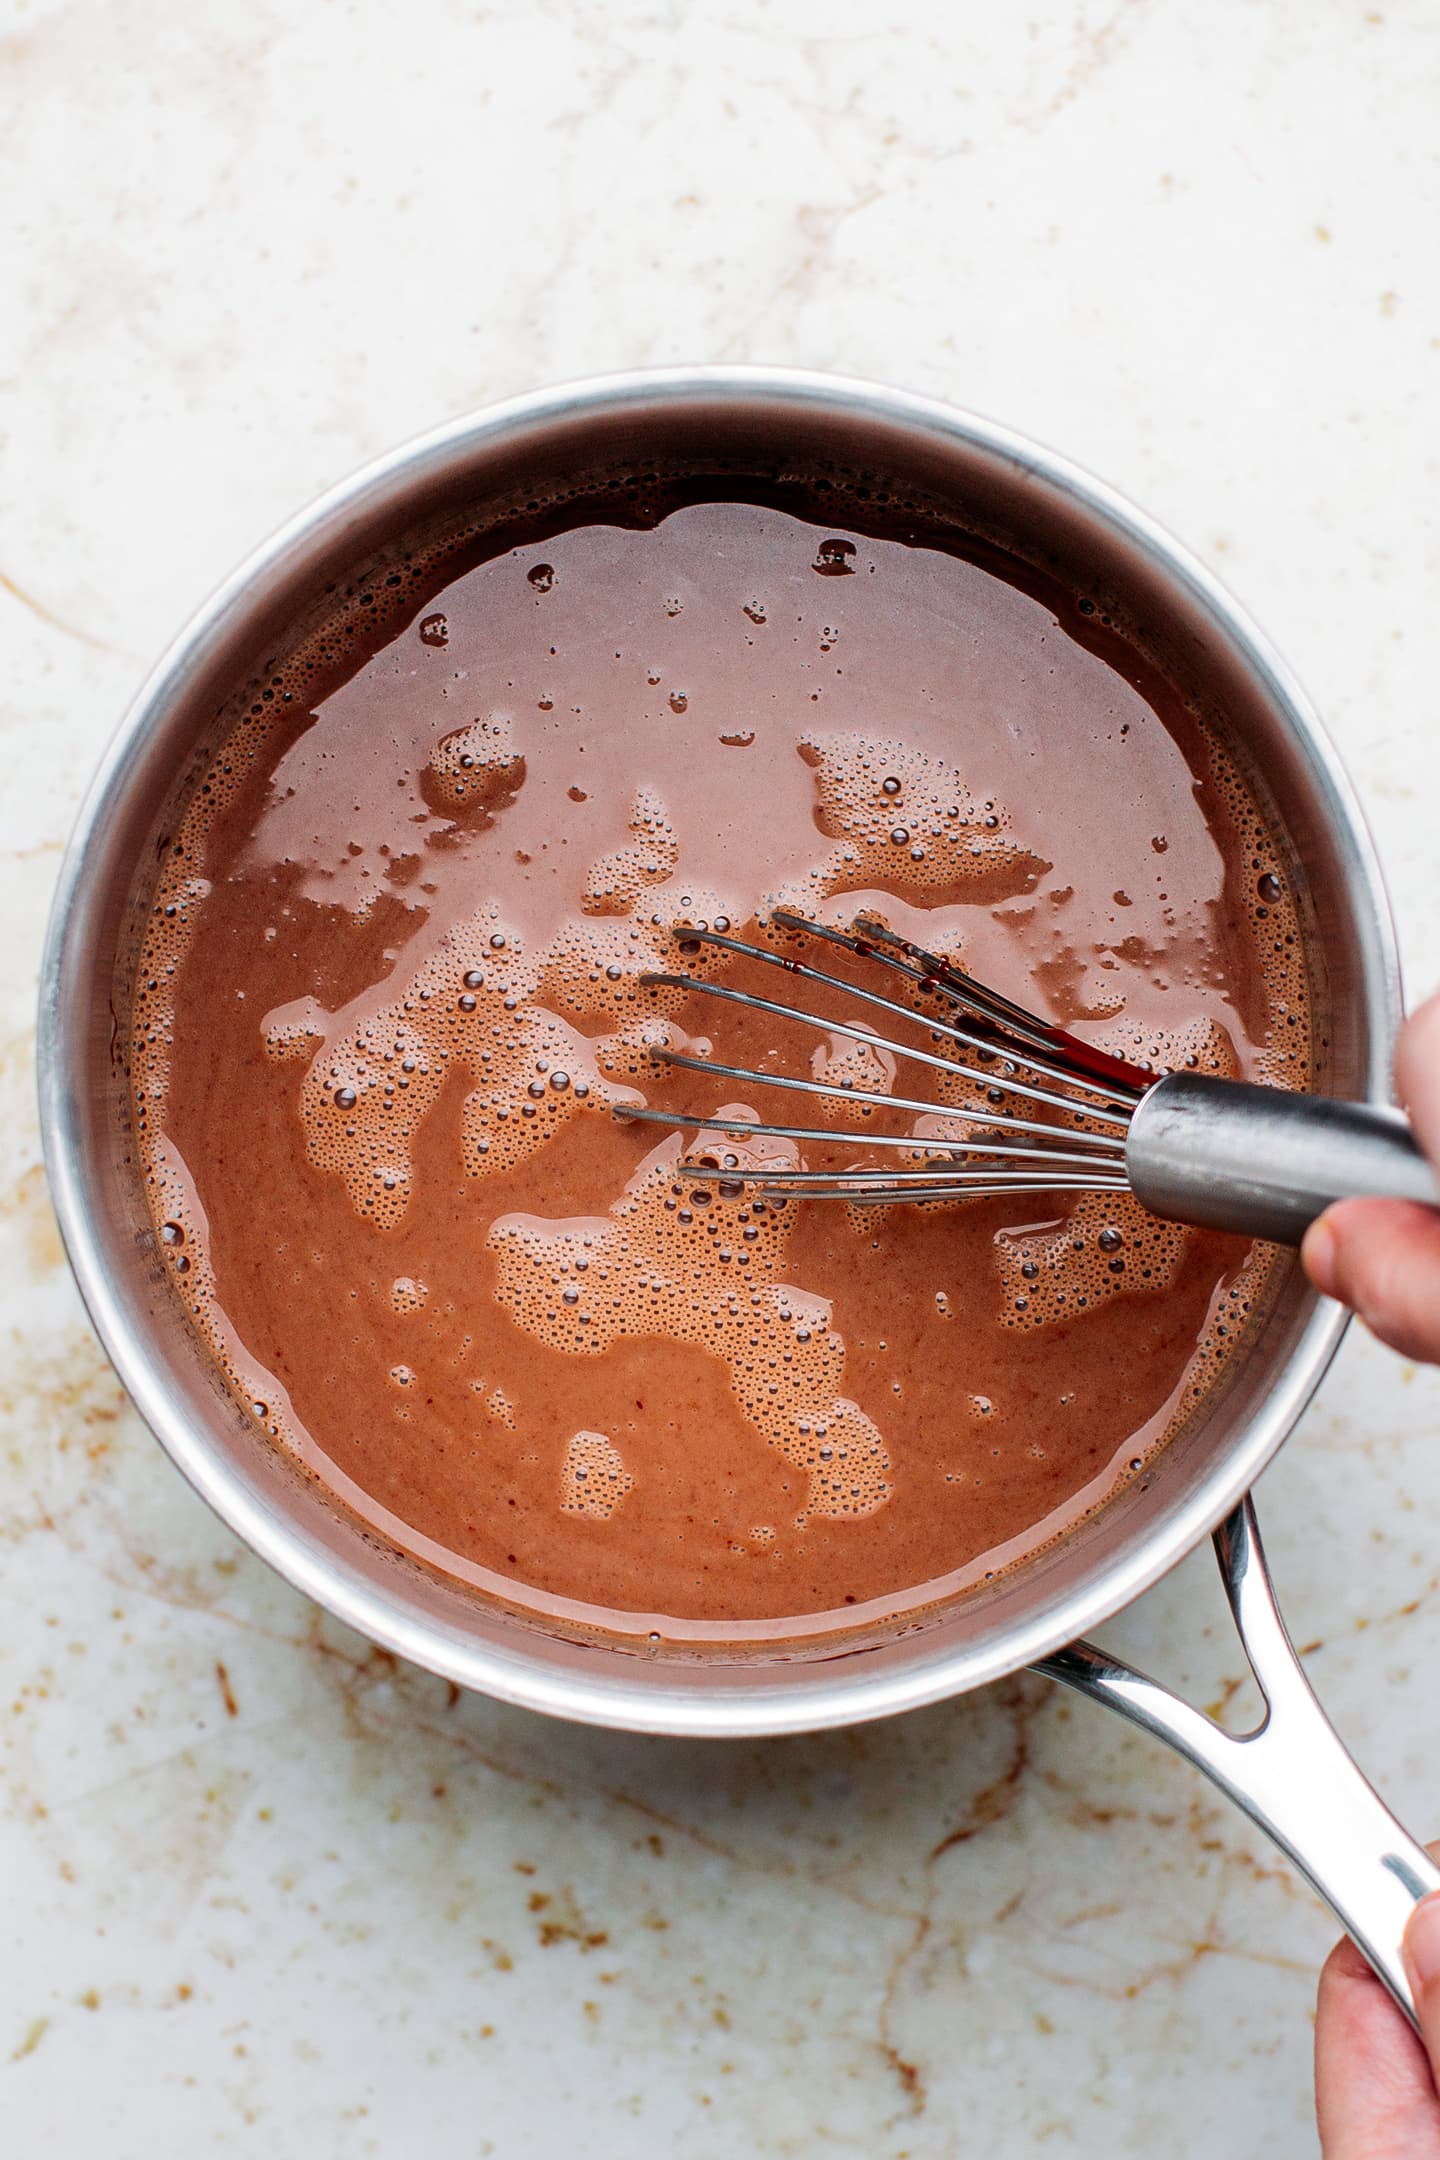 Whisking melted chocolate and milk in a saucepan.